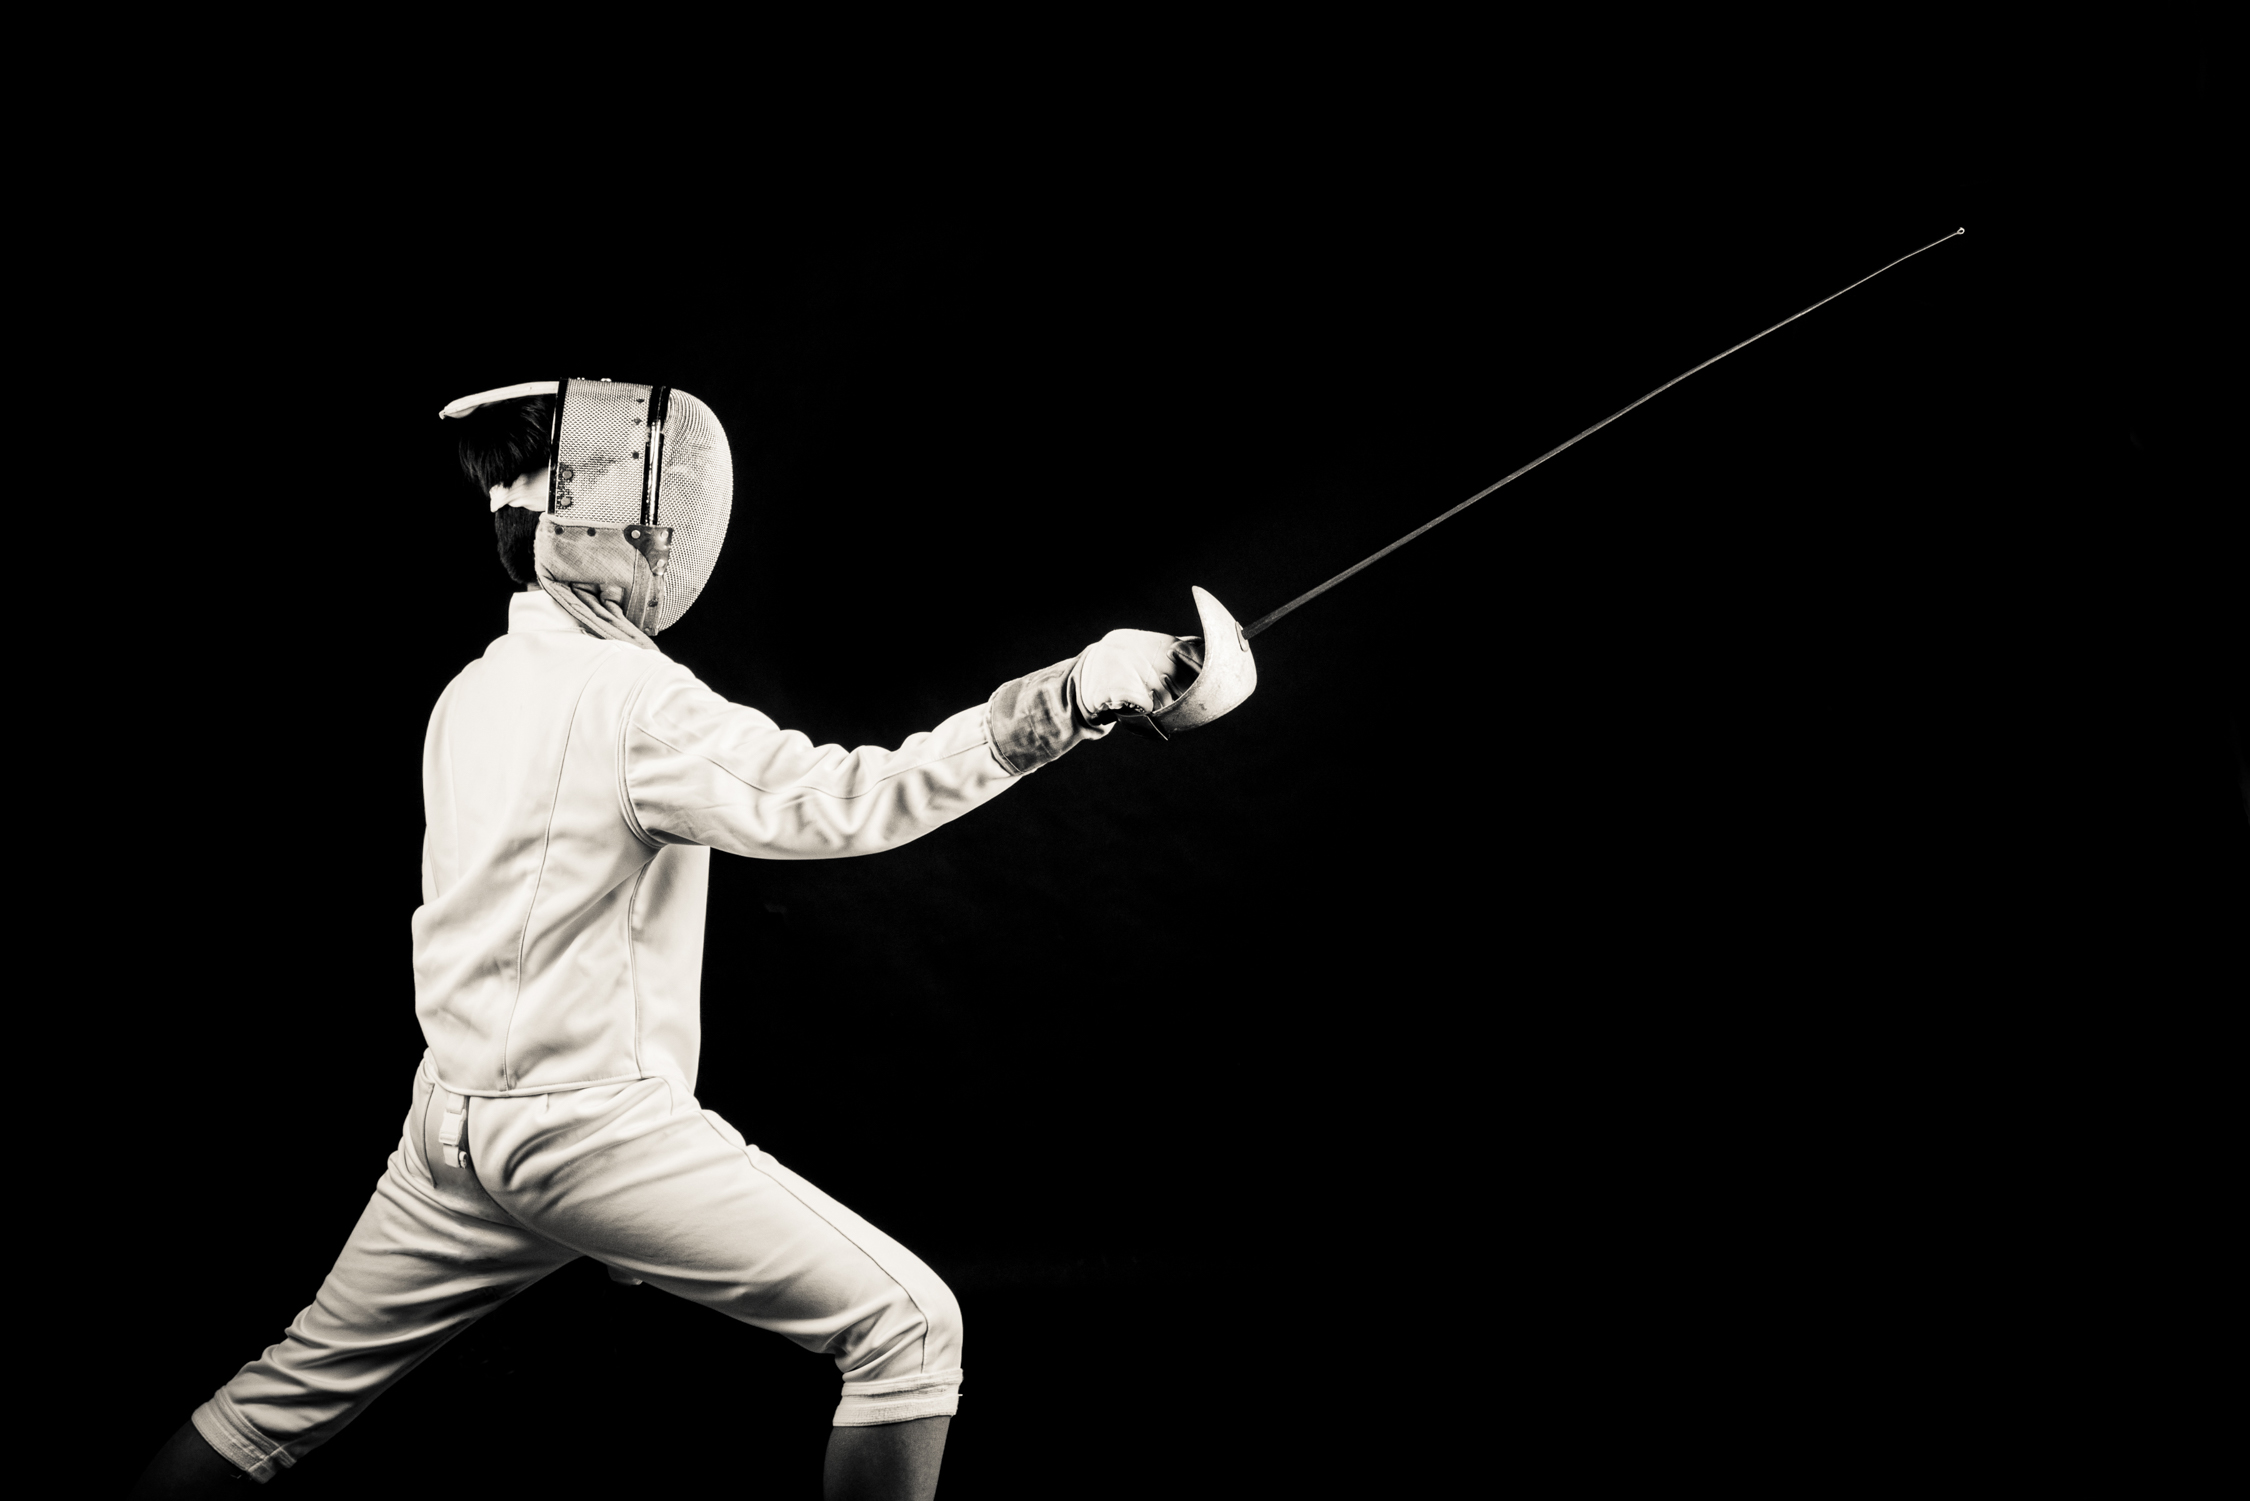 Professional fencer fencing in a photography studio setting during a personal branding photoshoot in Singapore, White Room Studio. Credit: White Room Studio Pte Ltd